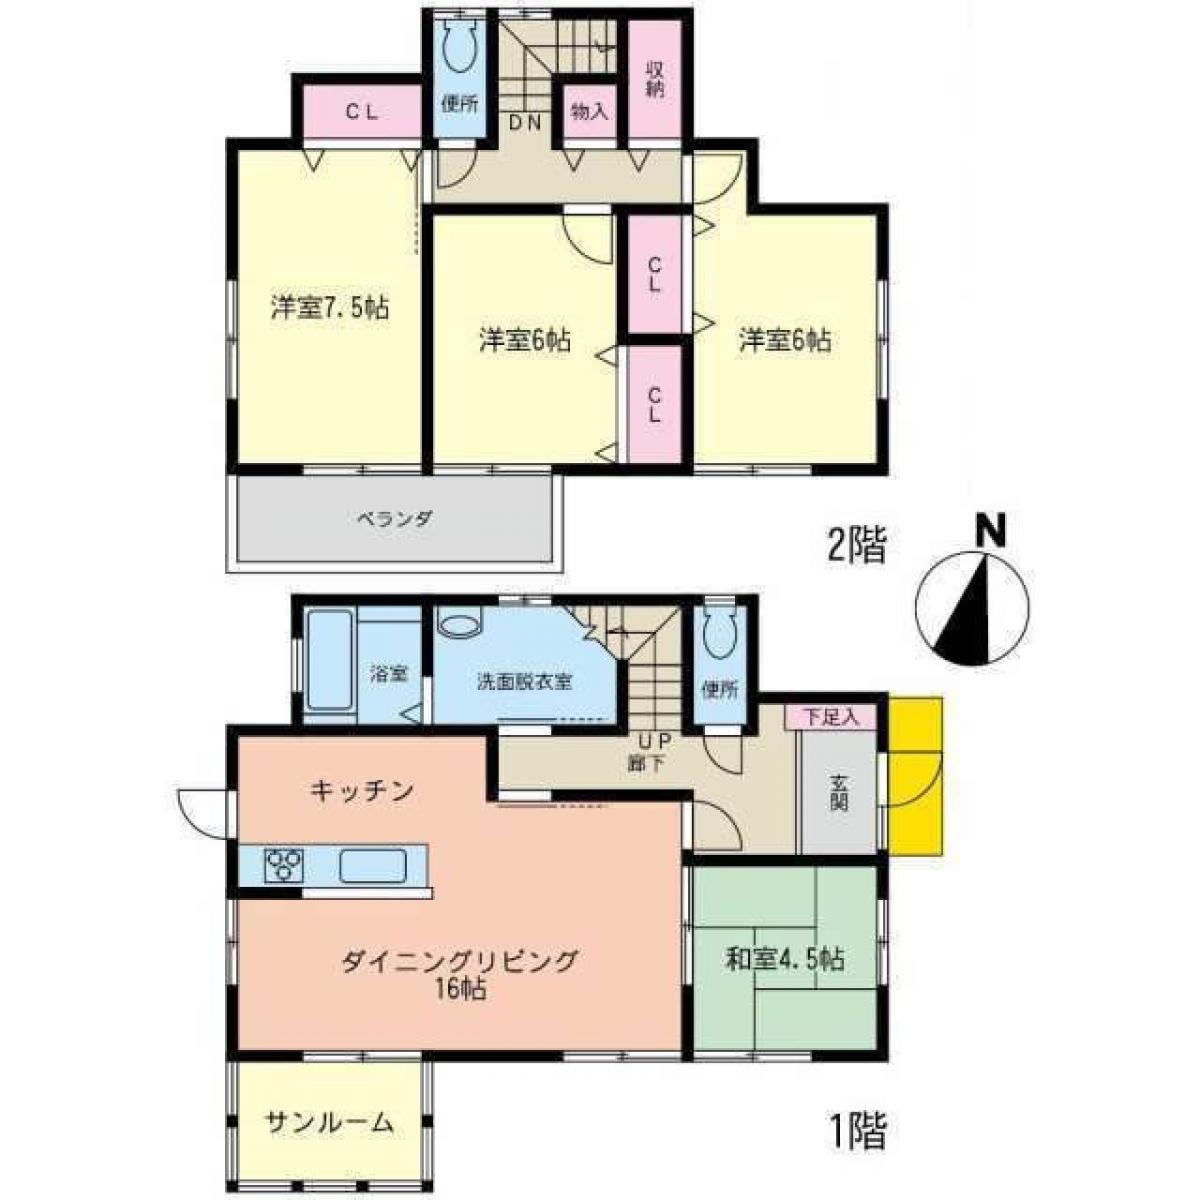 Picture of Home For Sale in Yachimata Shi, Chiba, Japan